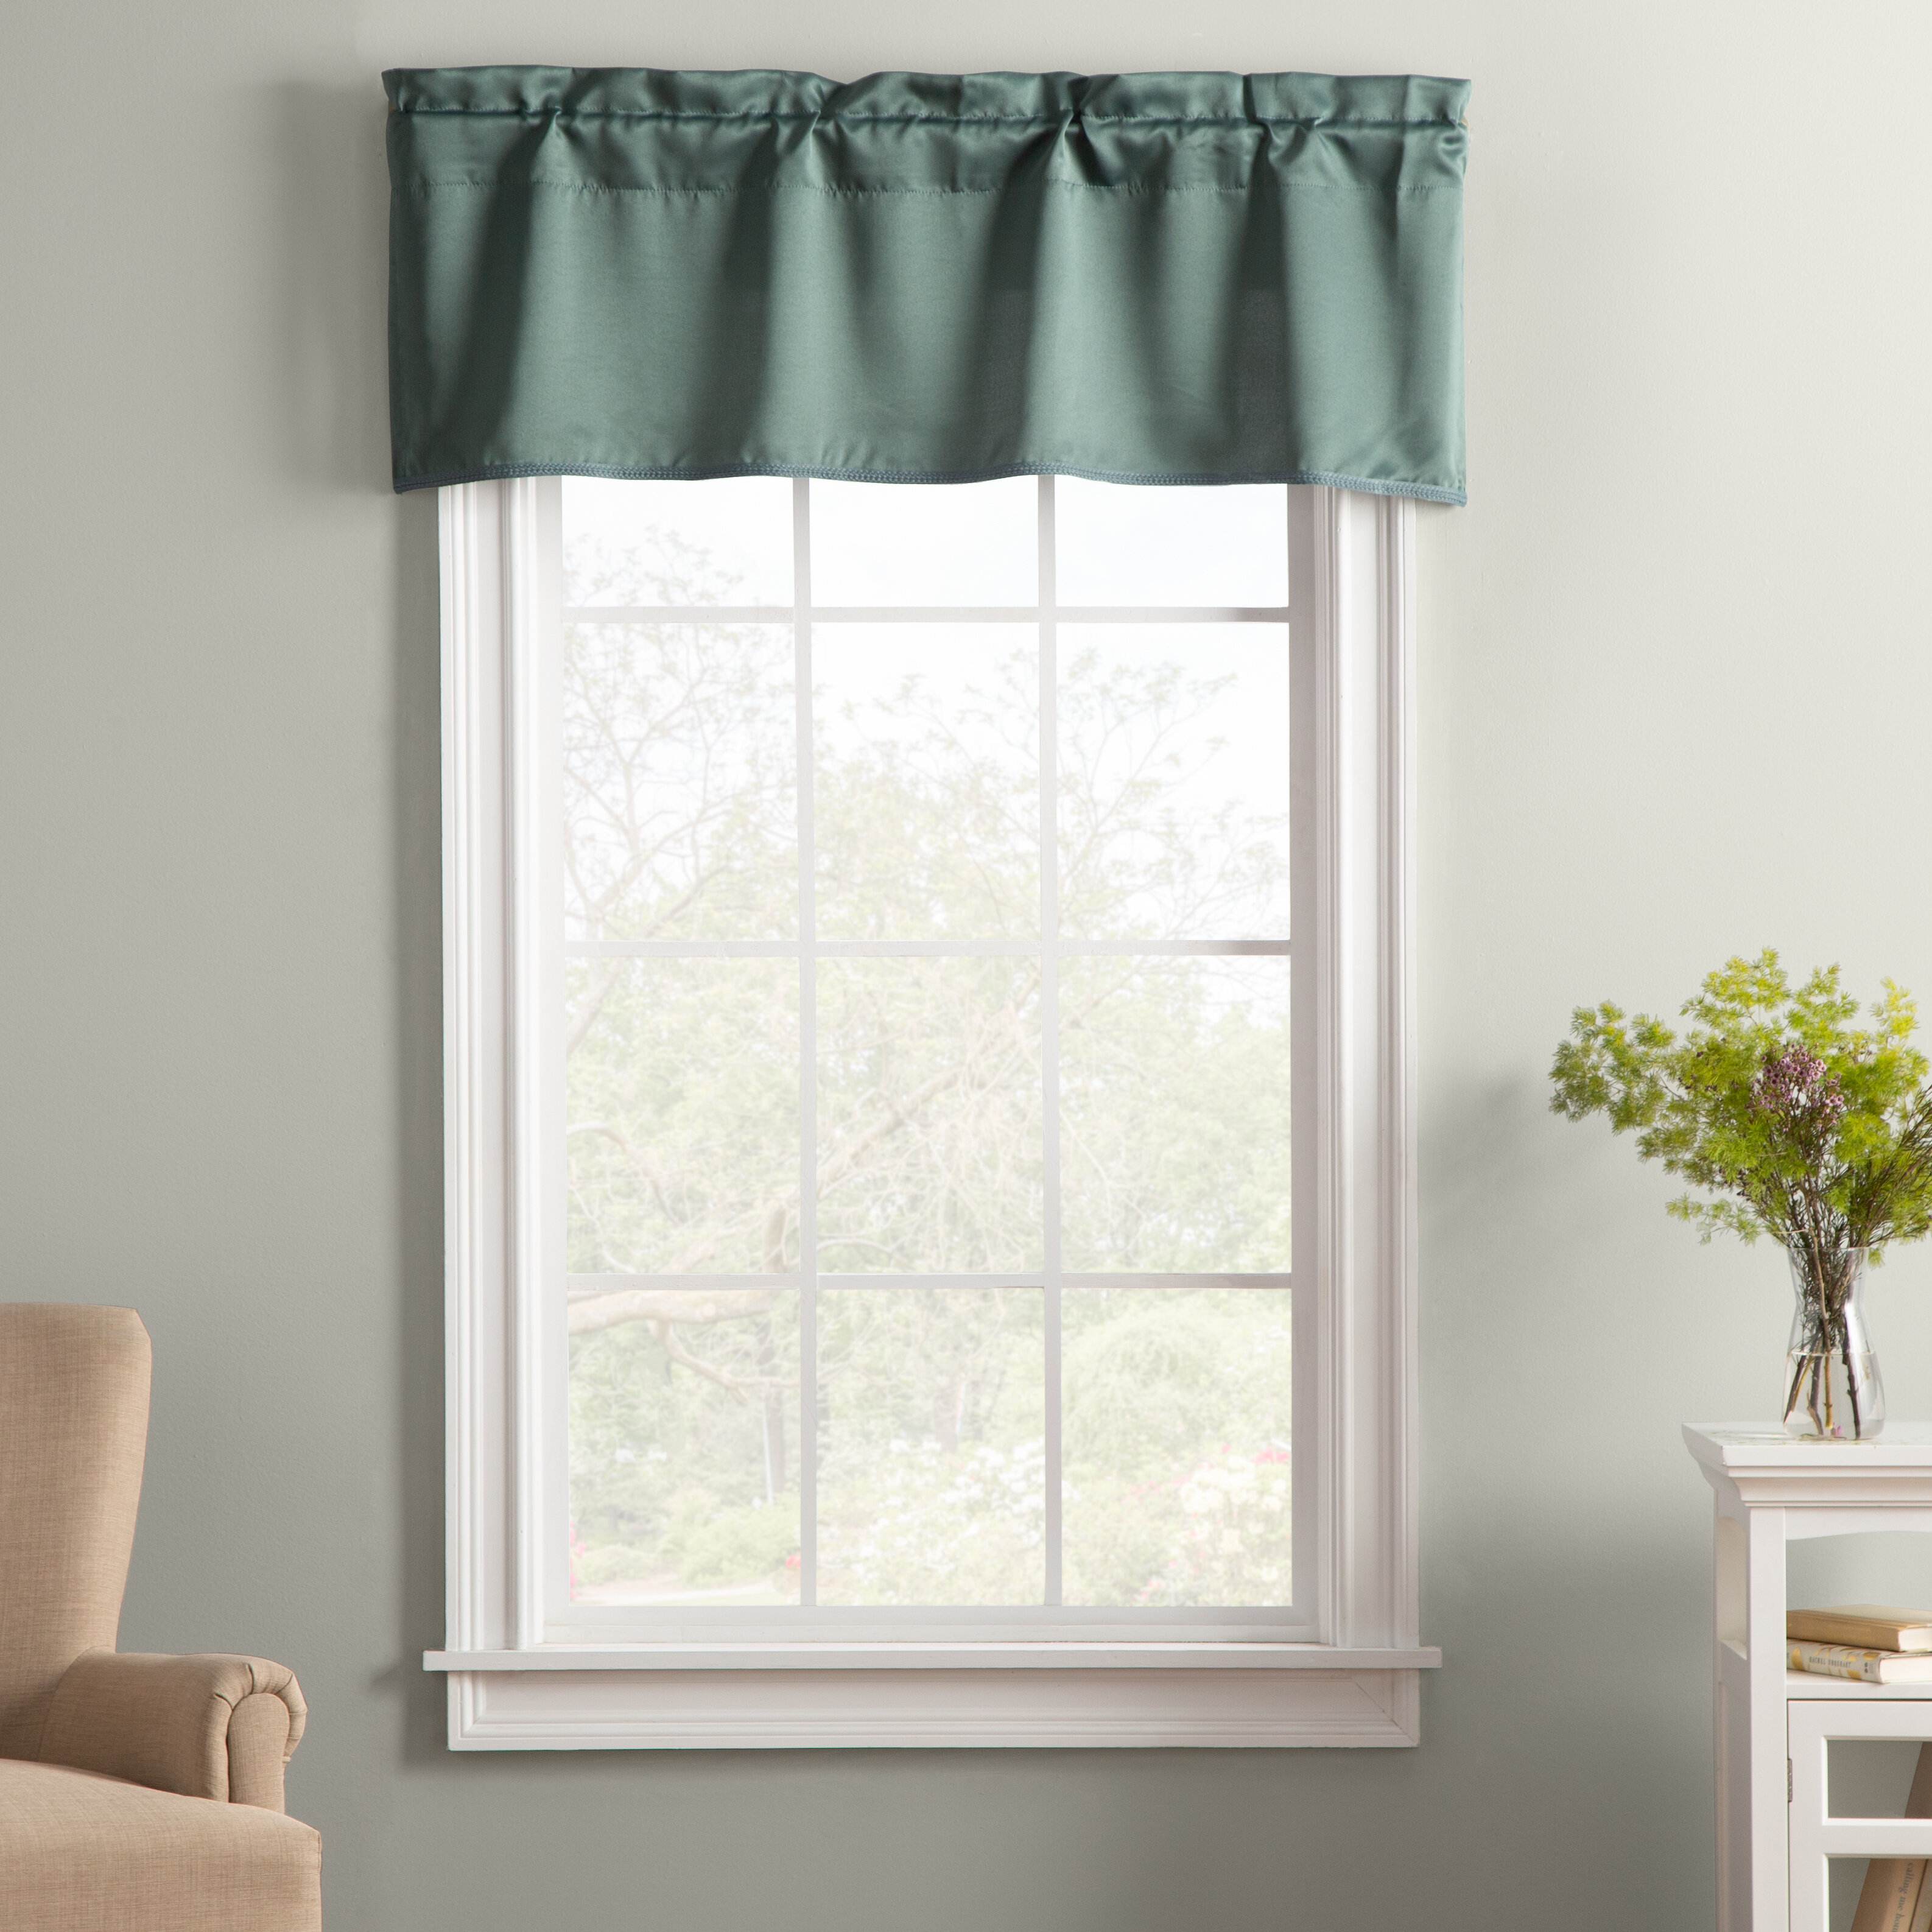 Featured image of post Green Kitchen Window Curtains - Green straight window curtains valance, green straight decorative window valance, modern custom valance, straight cut that can be used alone or over a tier or another panel.